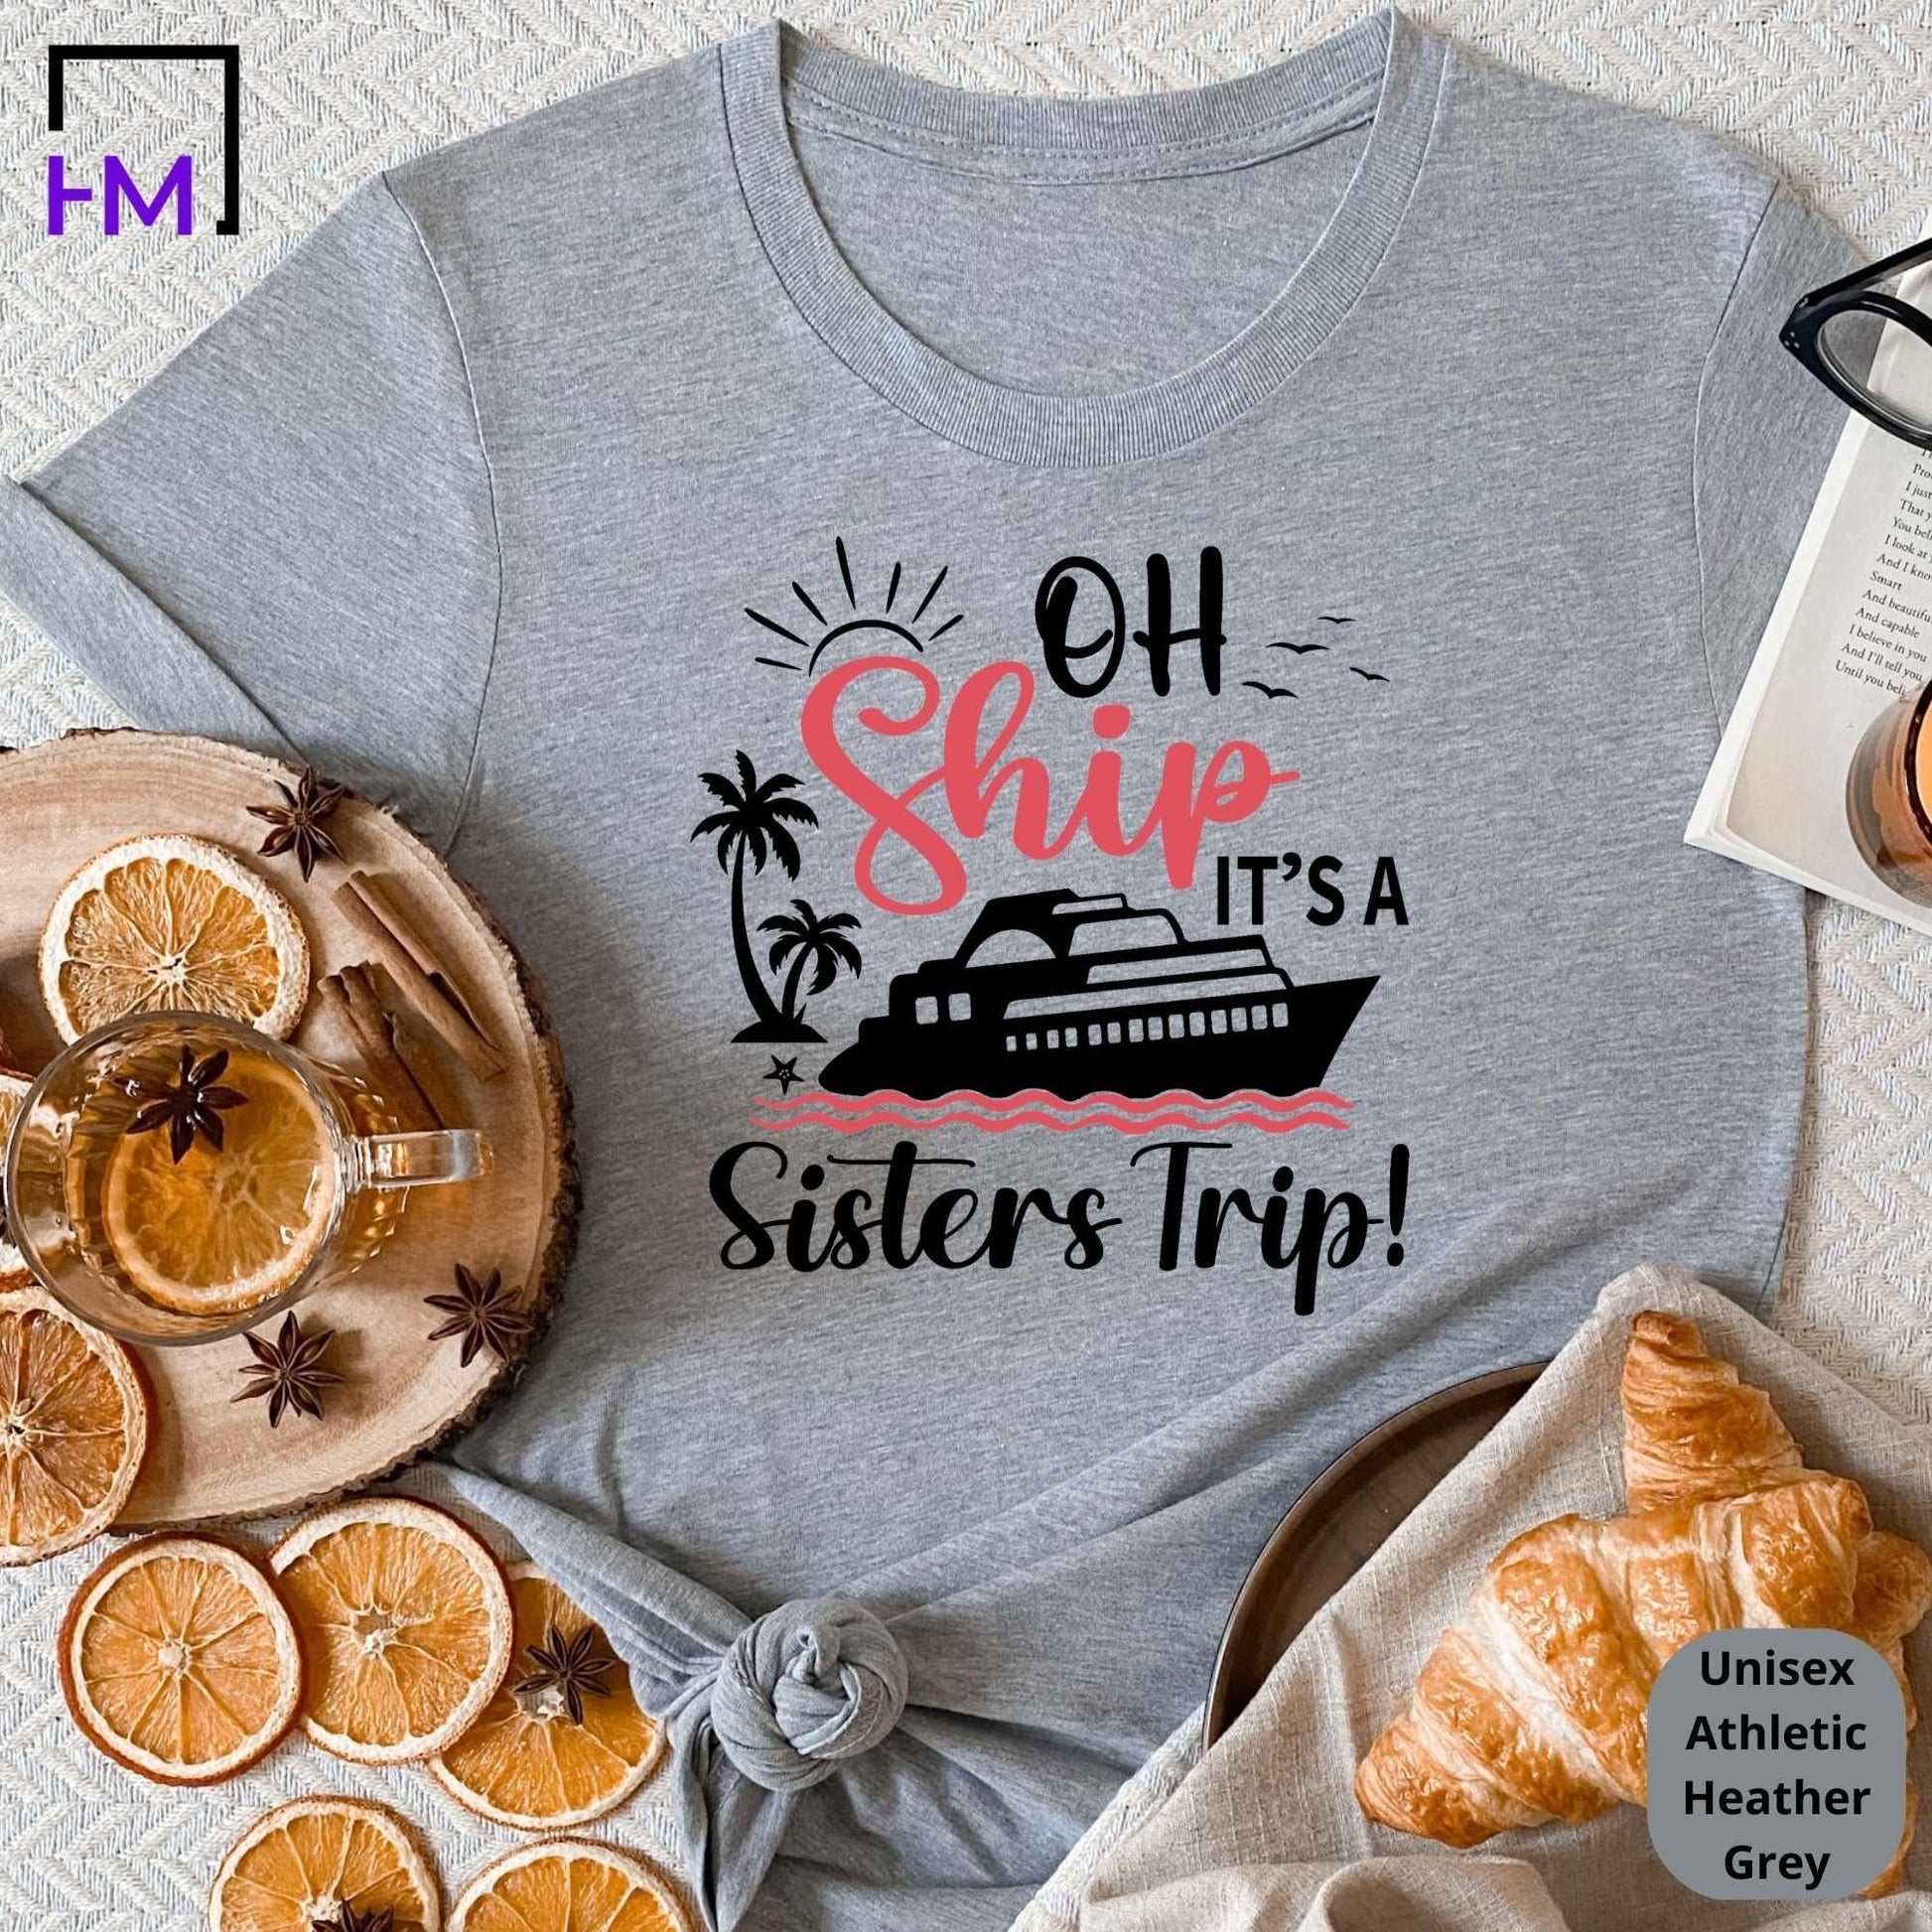 Sisters Cruise Shirts for Girls Trip HMDesignStudioUS